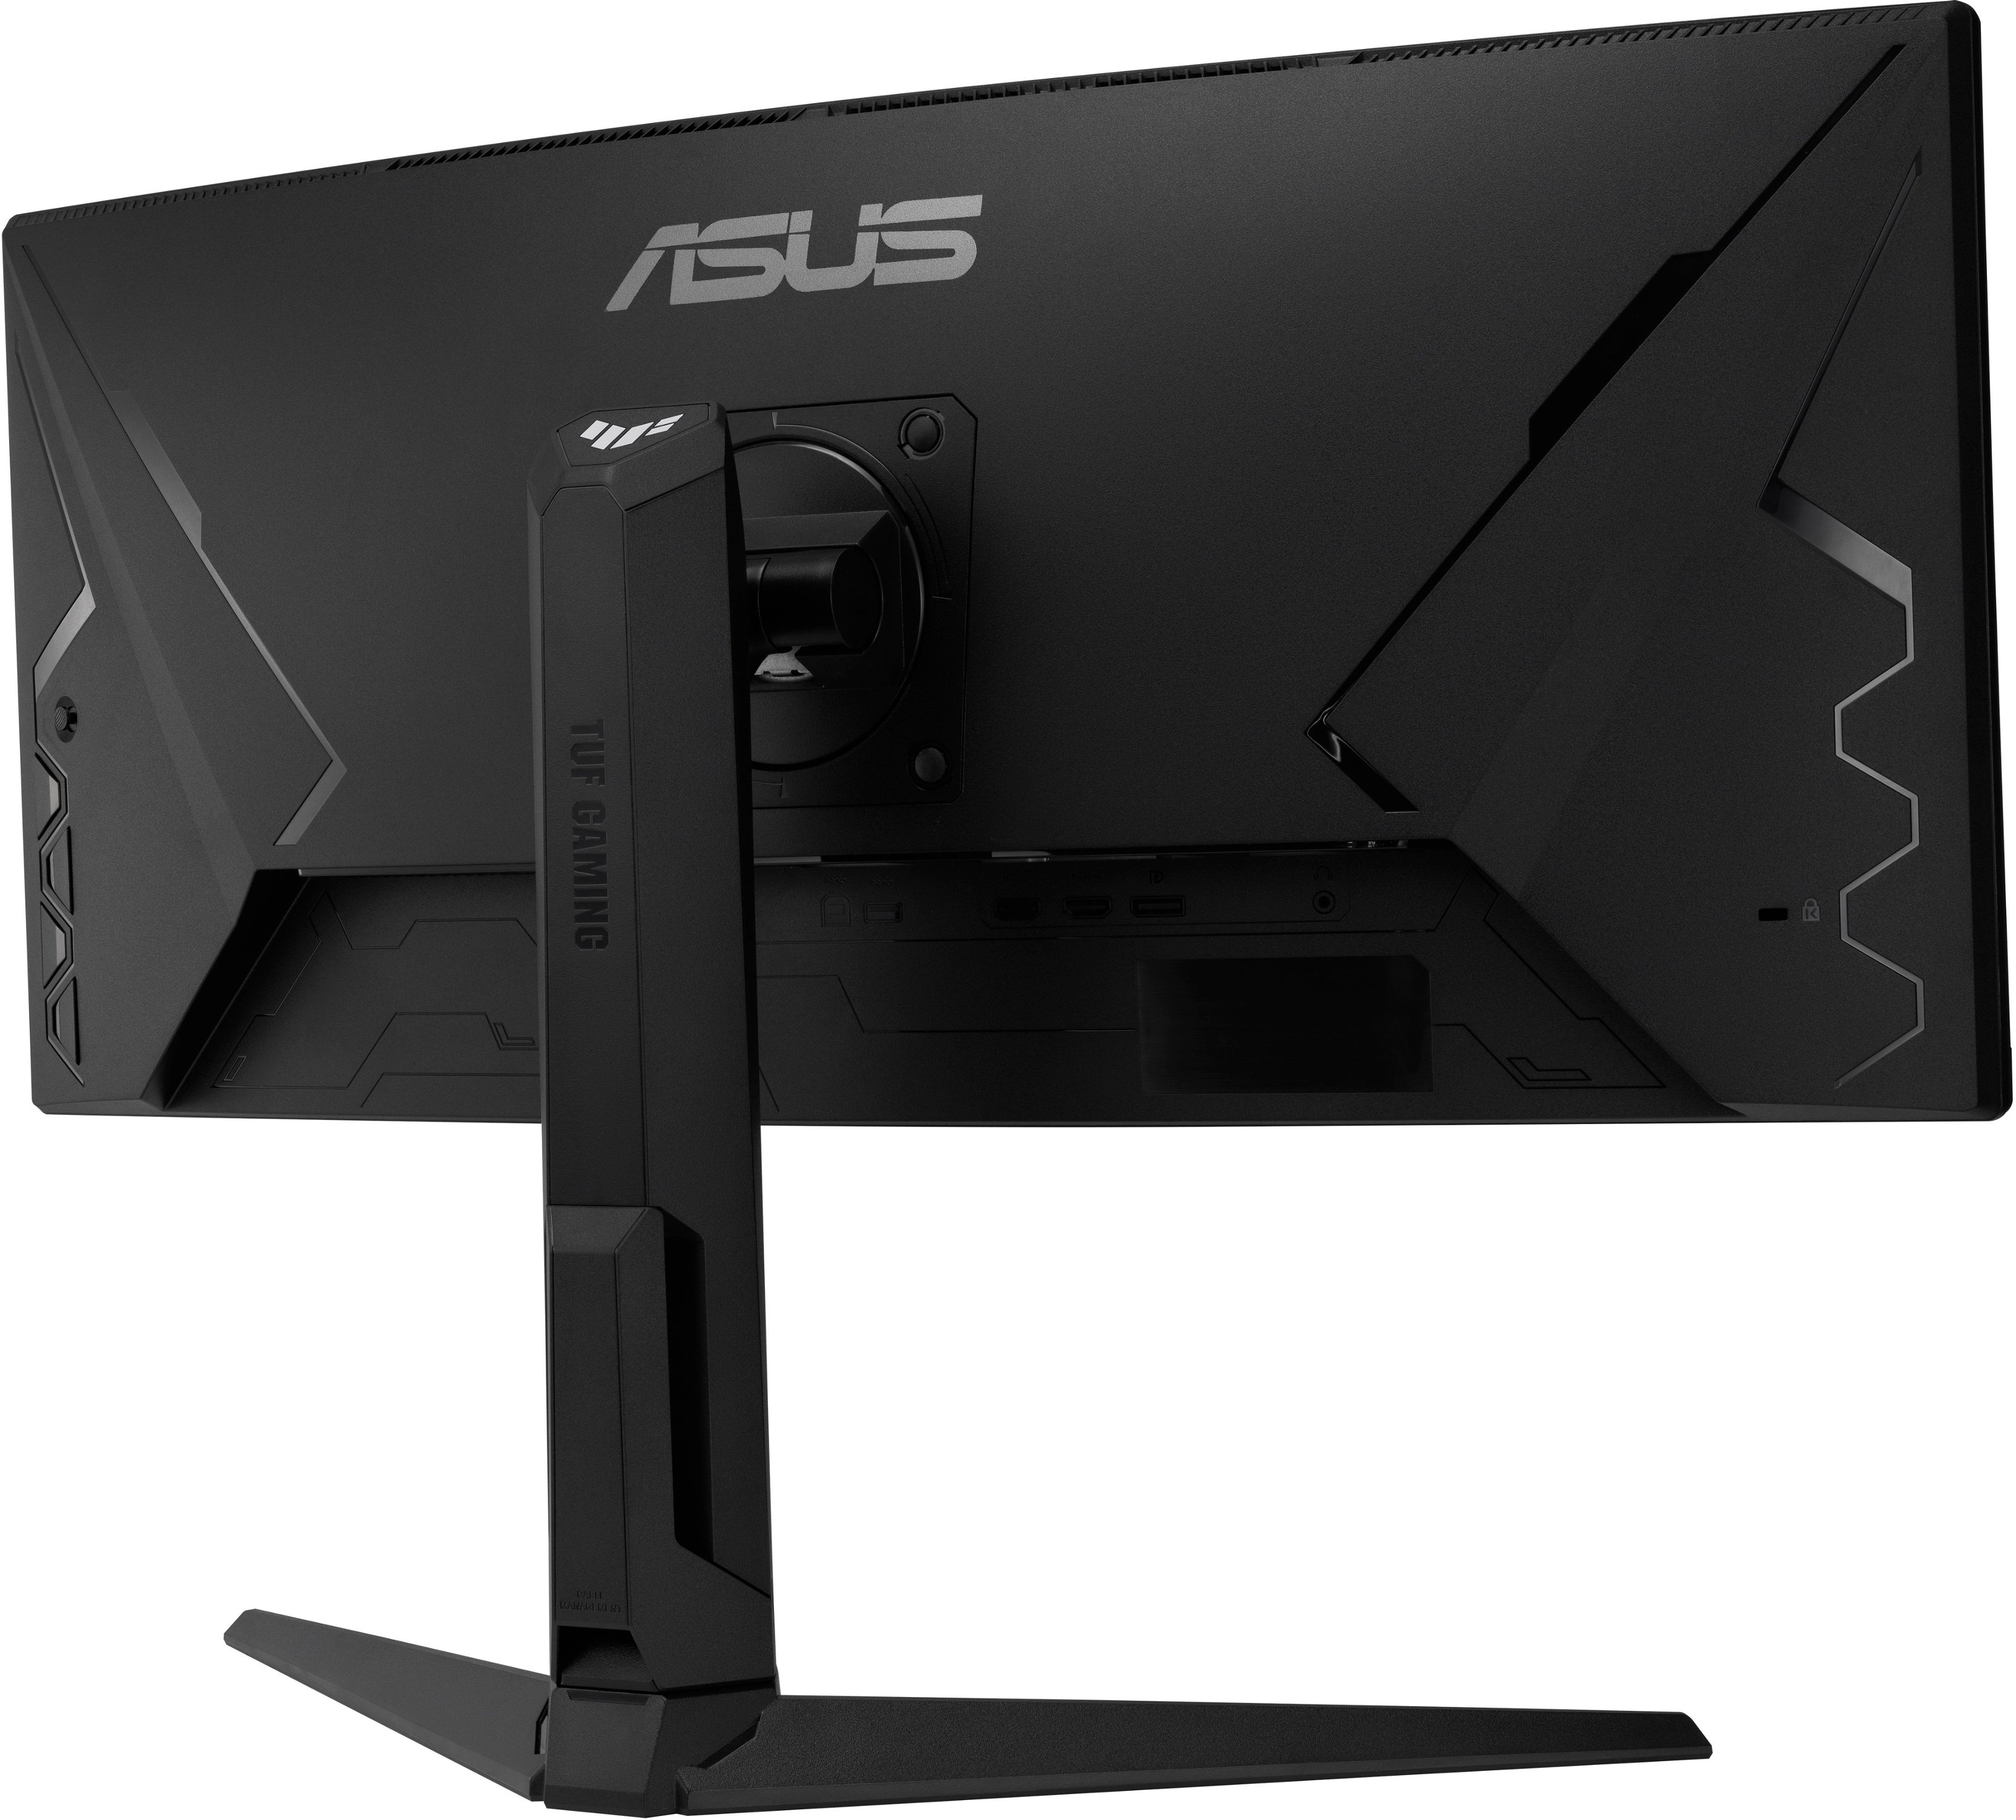 Back View: ASUS - TUF 29.5” WLED FreeSync Gaming Monitor with HDR (DisplayPort,USB)